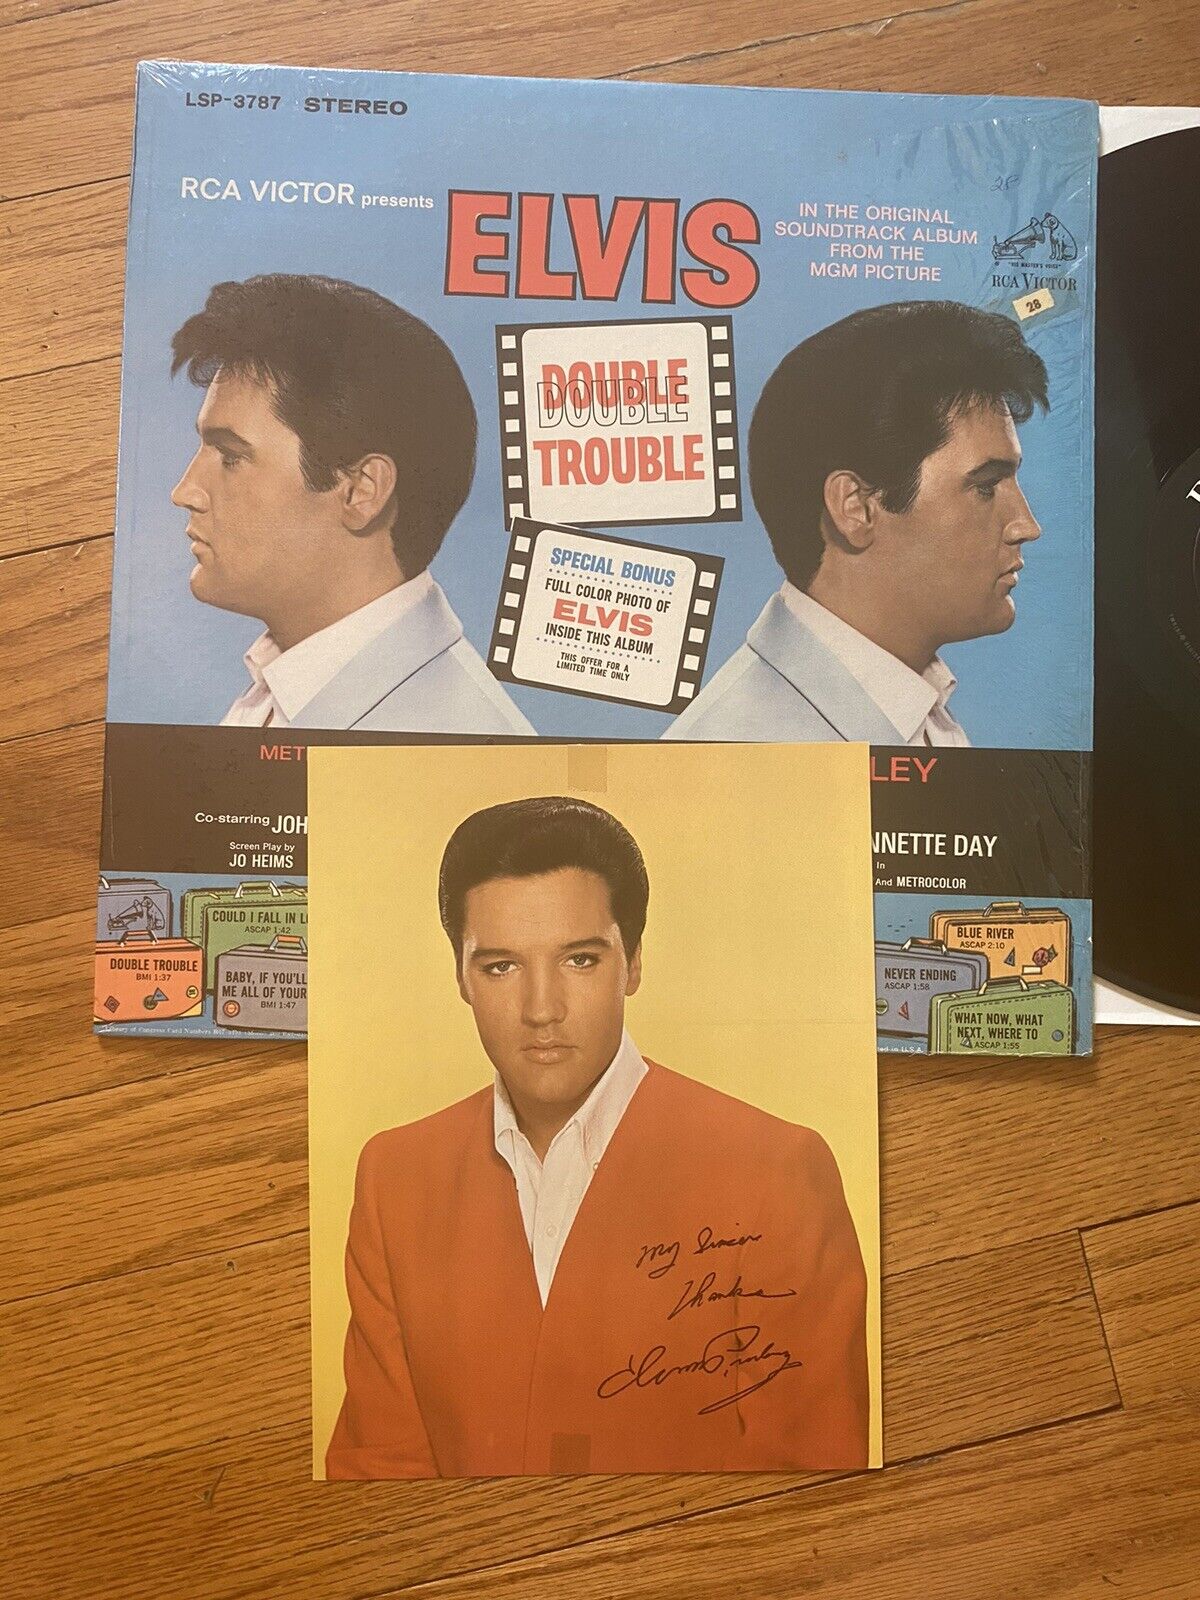 ELVIS PRESLEY DOUBLE TROUBLE VG+ LP ORIG.  RCA STEREO W/ PHOTO SHRINK 